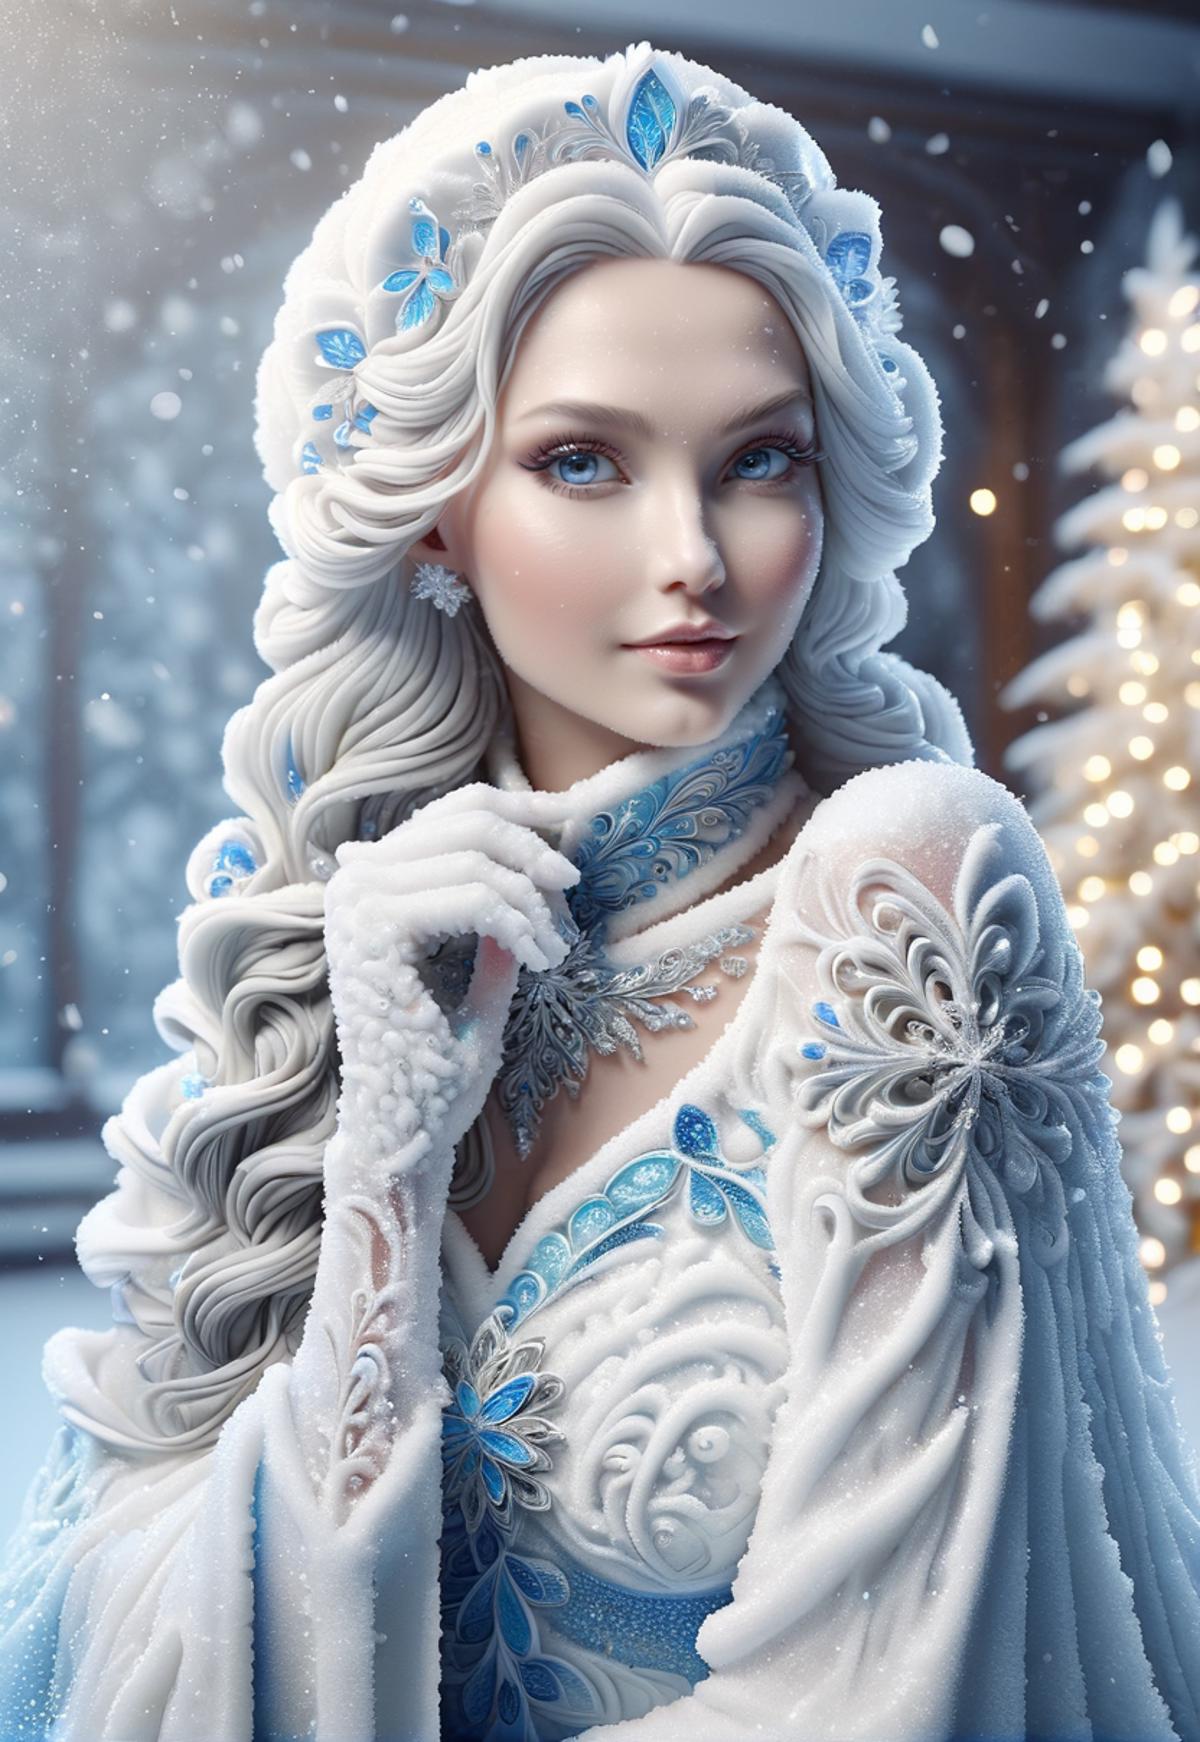 Blue-eyed Snow White with blonde hair and blue accents on her dress.